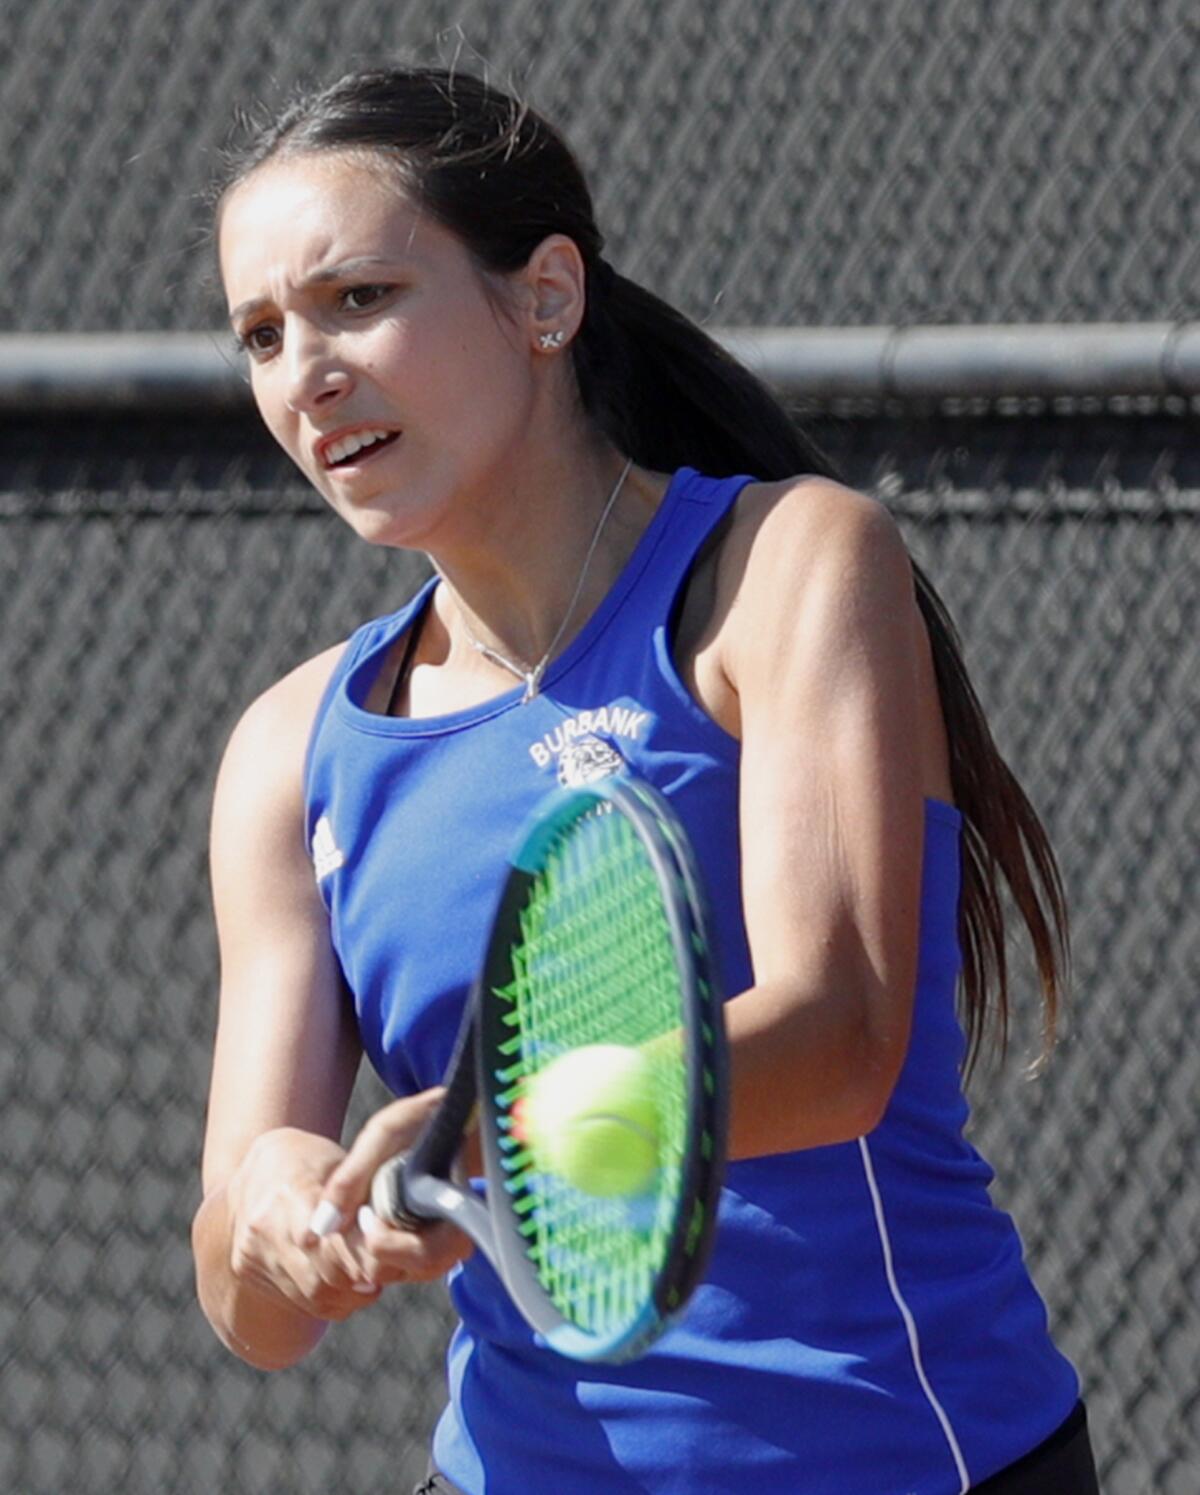 Burbank's Kristina Kirakosyan hits a backhand return against Arcadia in the singles semifinal in the Pacific League girls' tennis semifinals and finals at Burroughs High School on Wednesday, October 30, 2019. A couple of the contests were second-round contests, played today because of poor air quality on Monday.